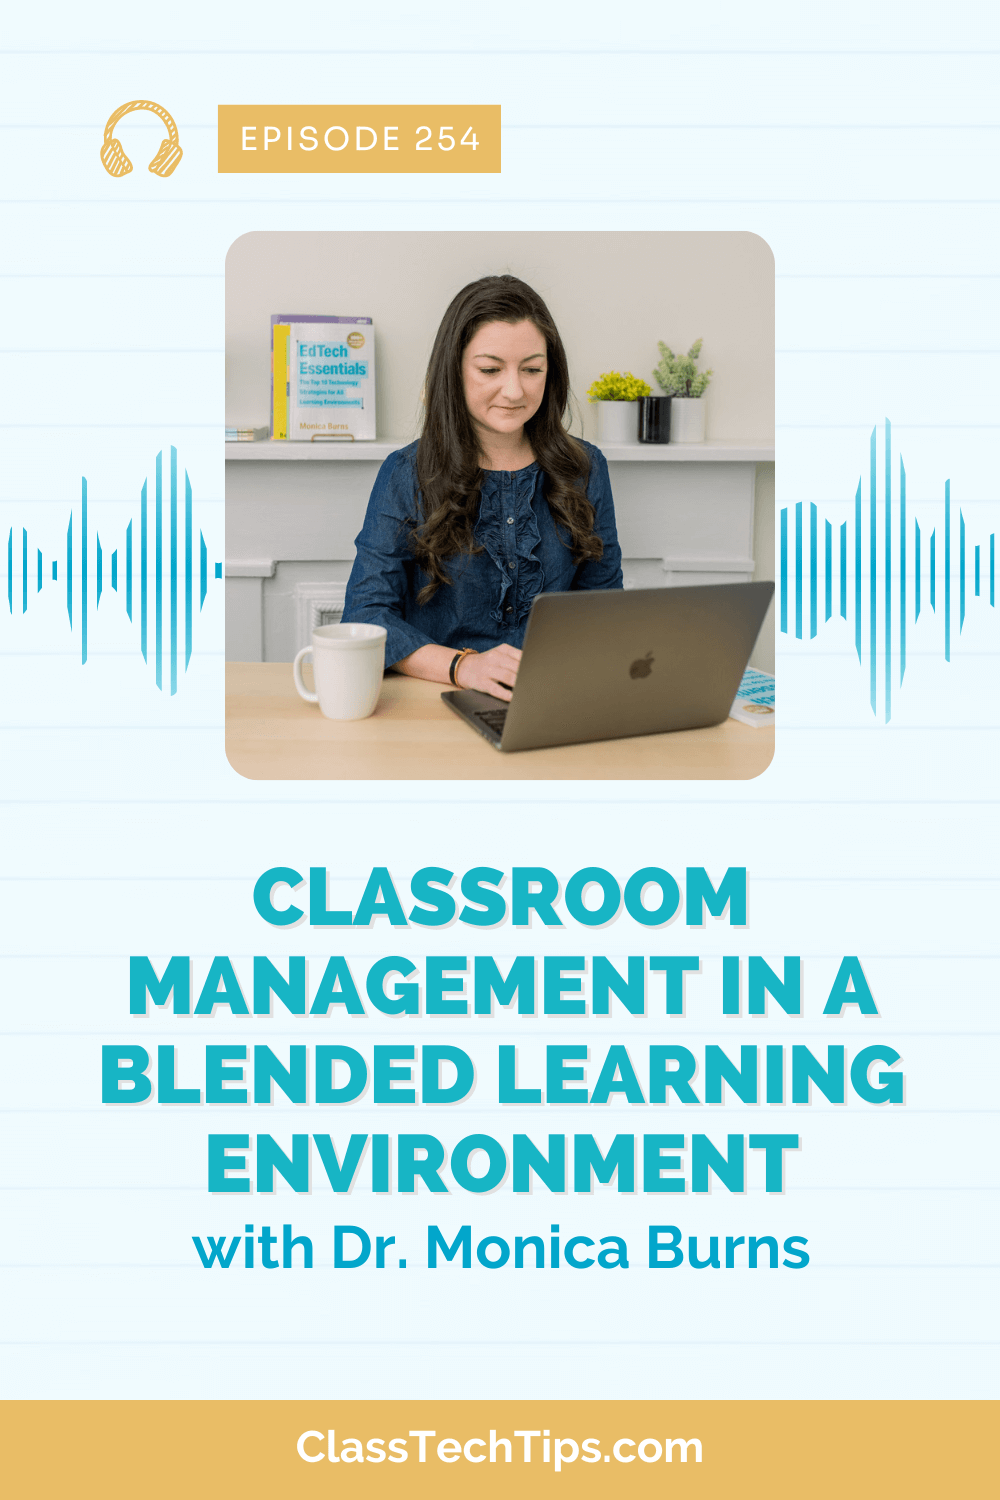 Image for podcast episode 254 featuring Dr. Monica Burns on the topic of "Classroom Management in a Blended Learning Environment". The image shows Dr. Burns working on a laptop at a desk with a mug and decorative plants, with a book titled "EdTech Essentials" in the background.